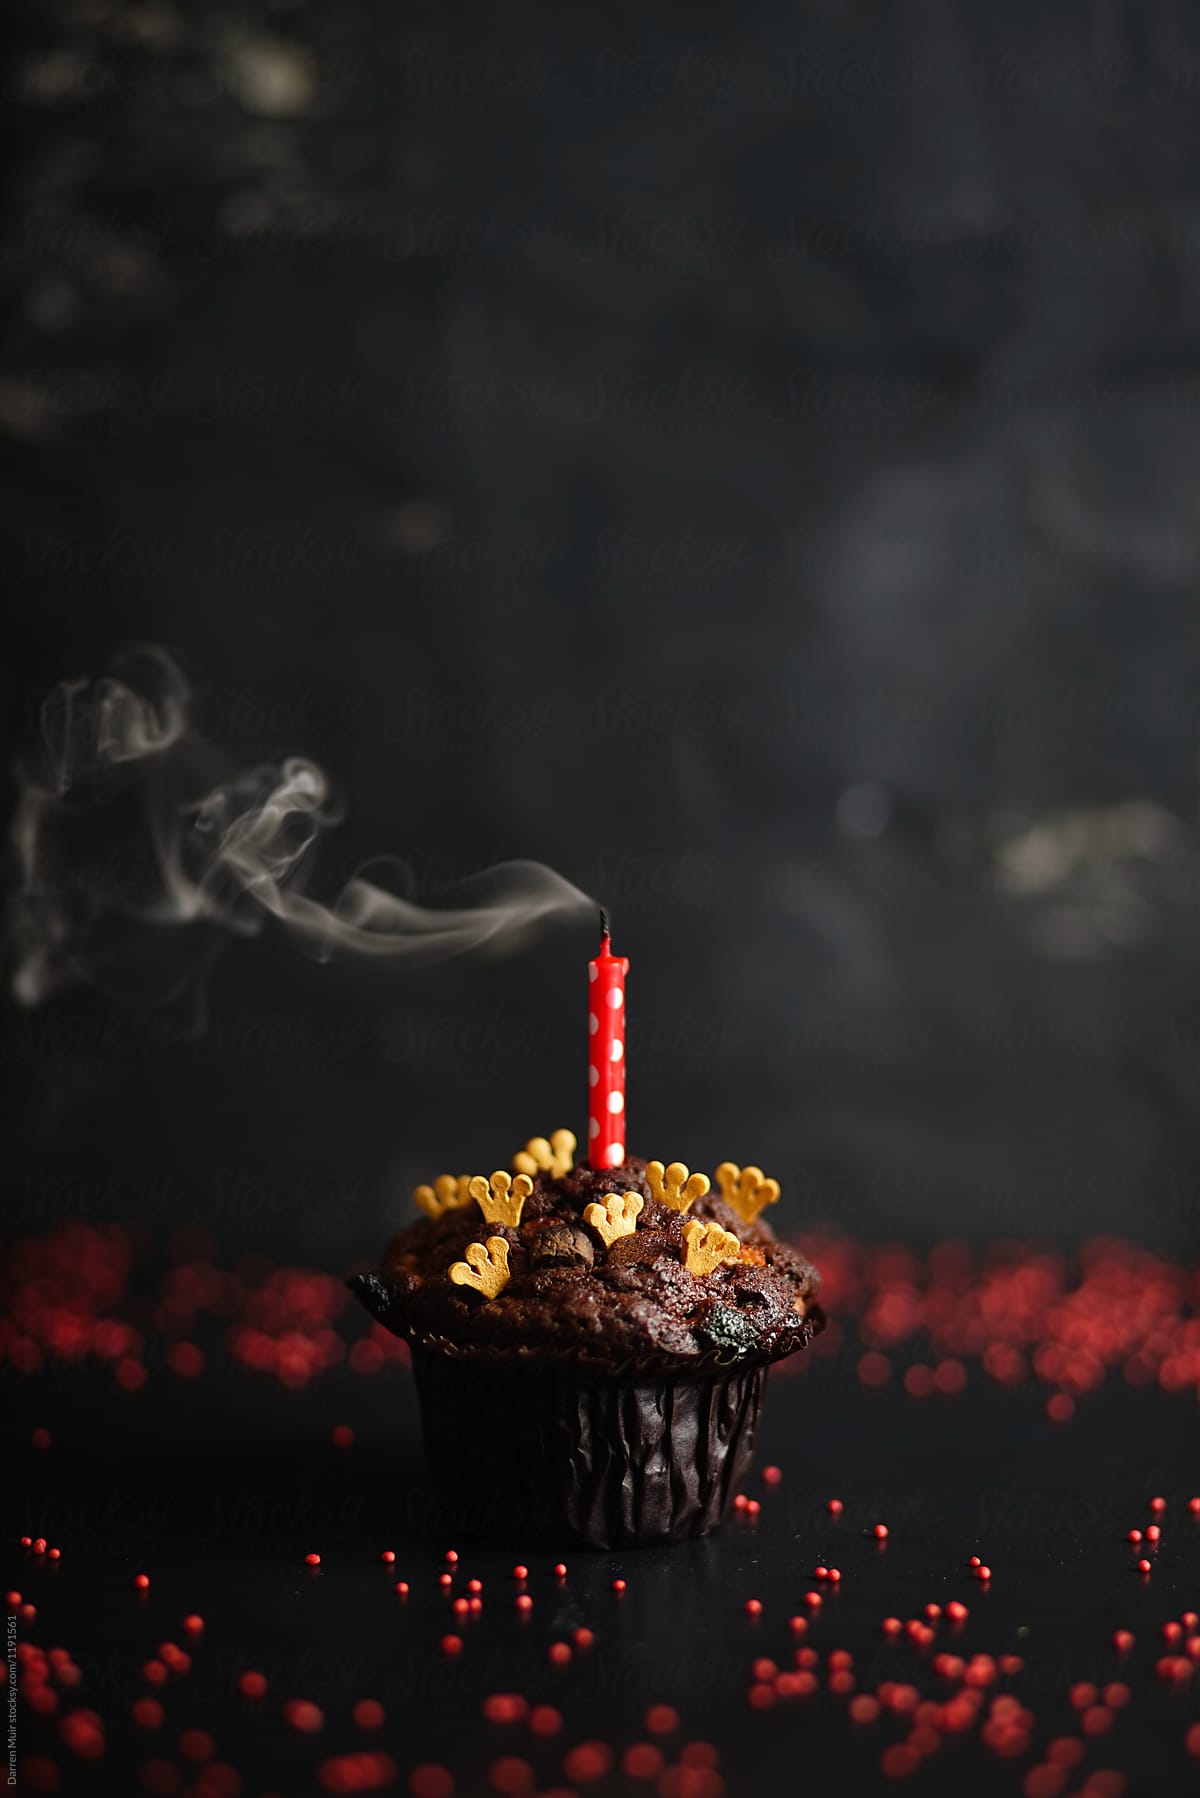 Chocolate cake with a single blown out candle.